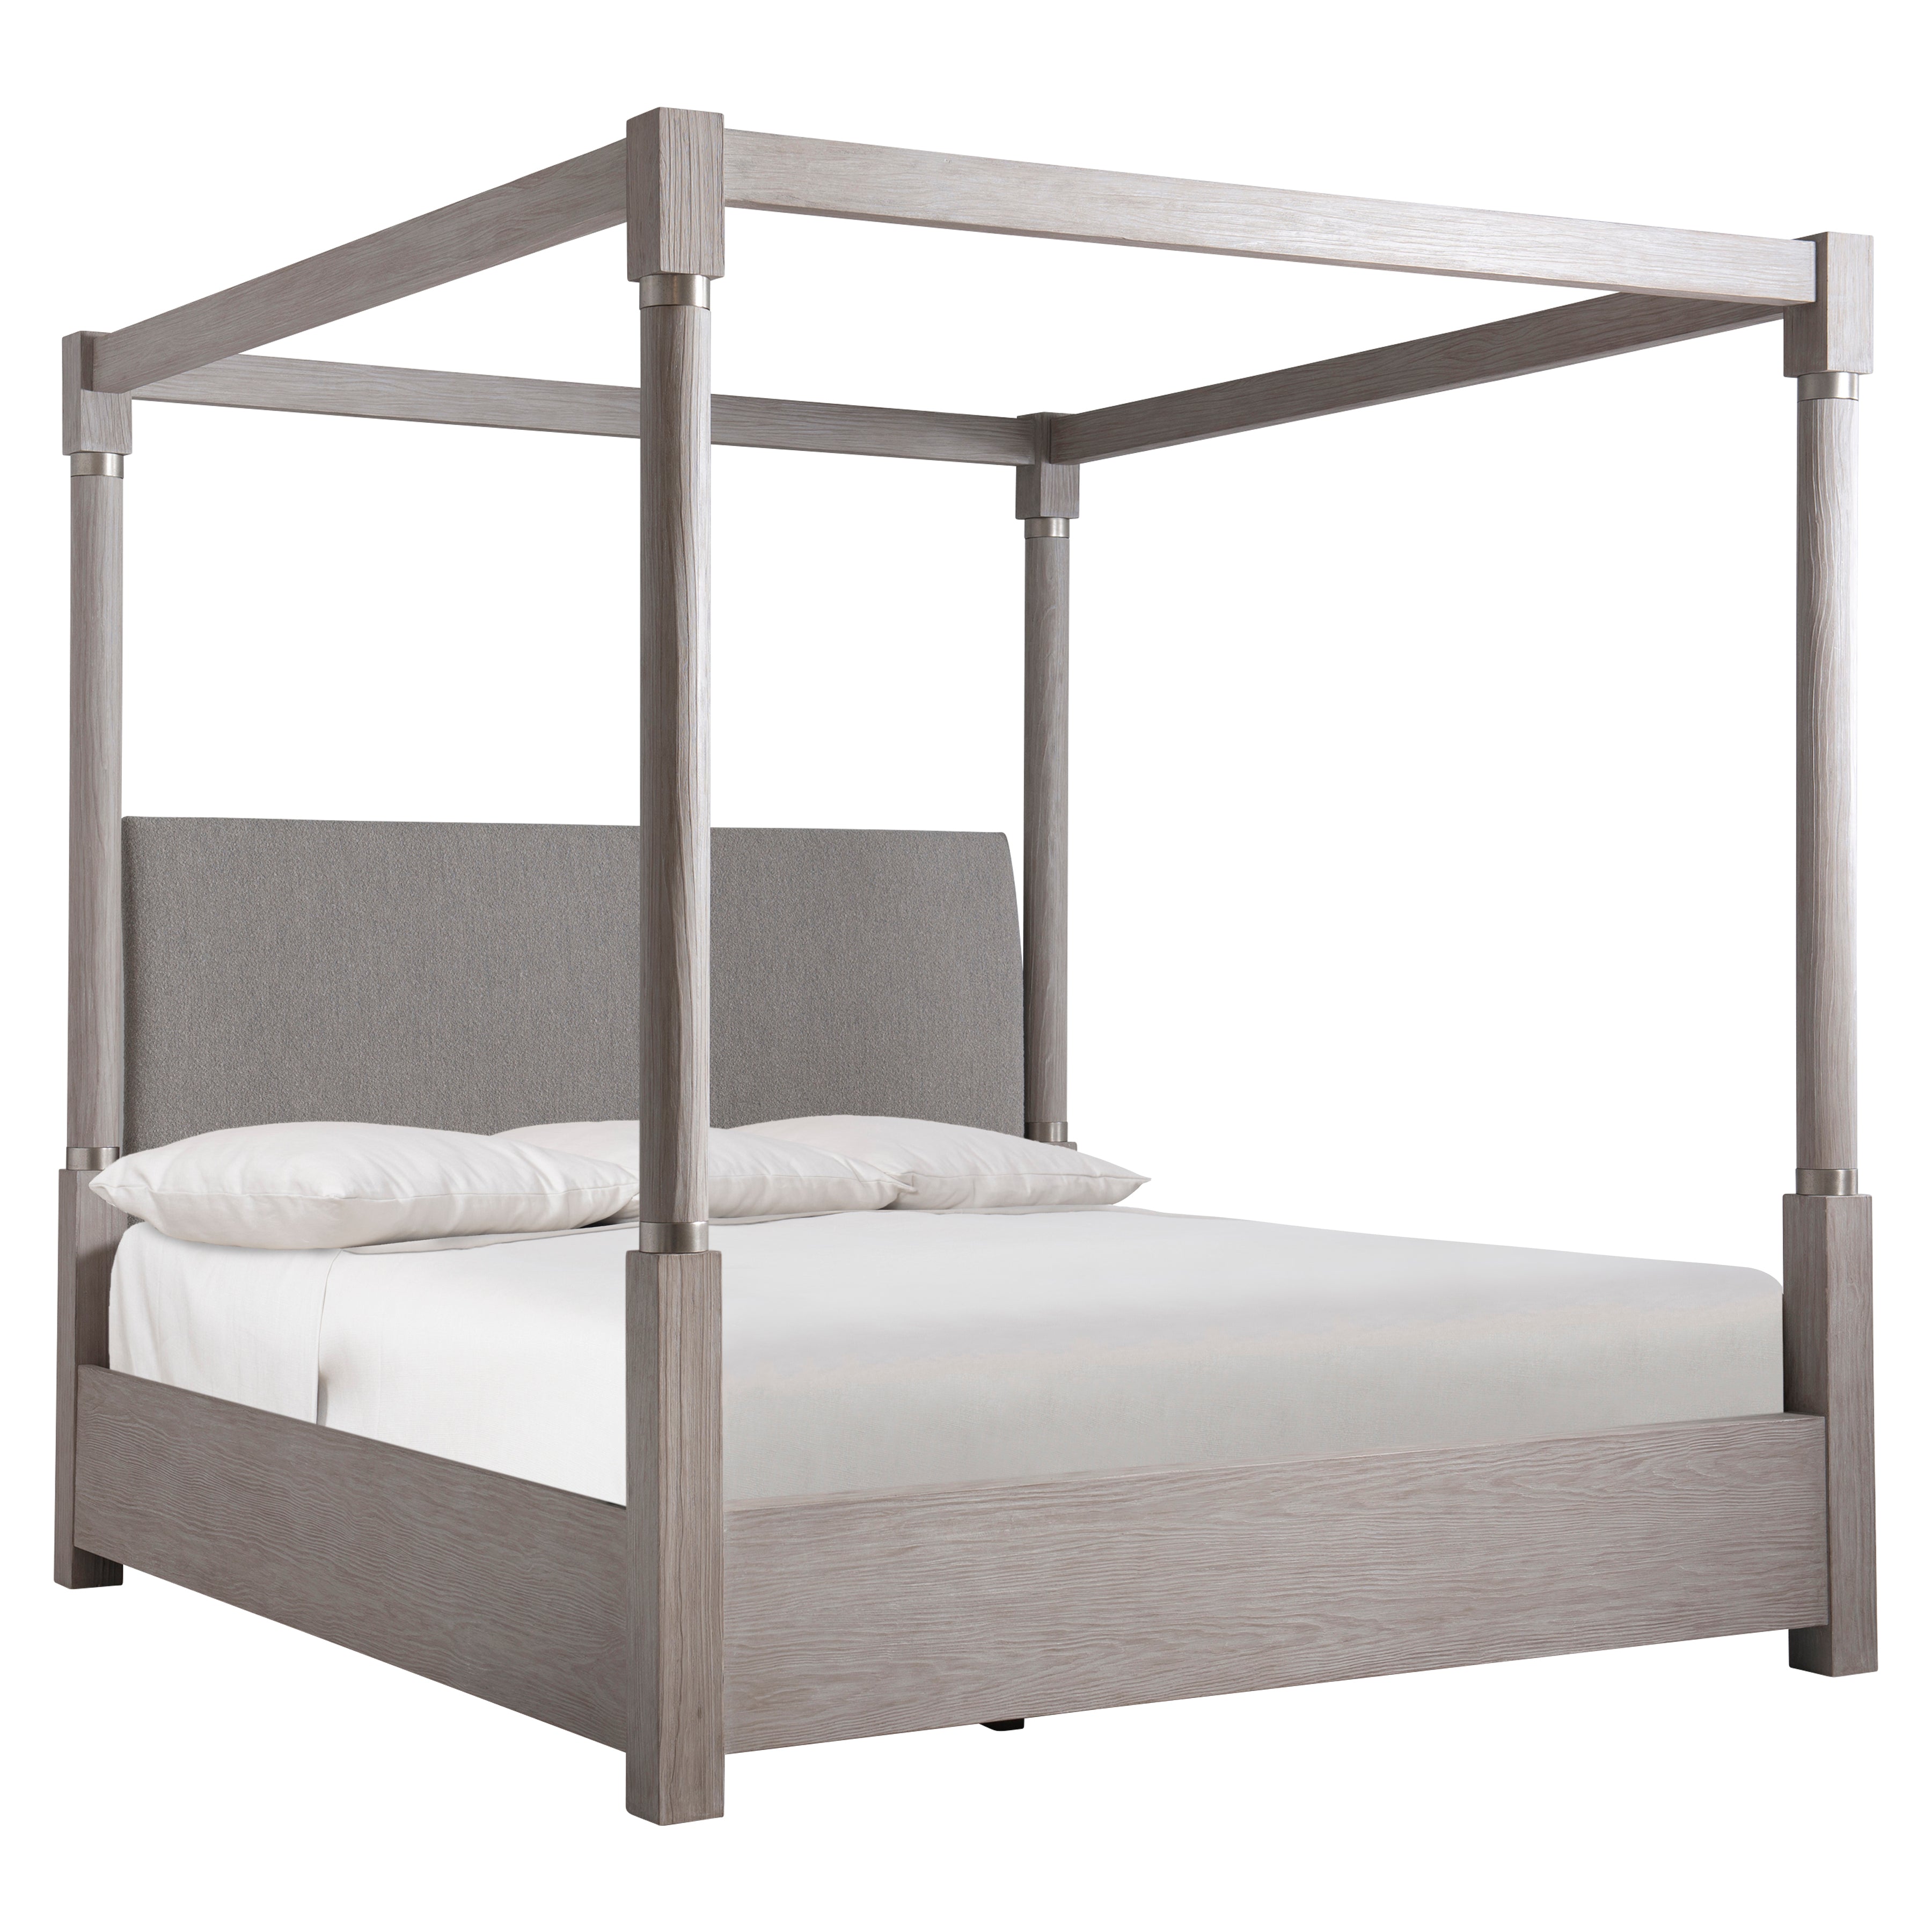 Trianon Upholstered Queen Canopy Bed